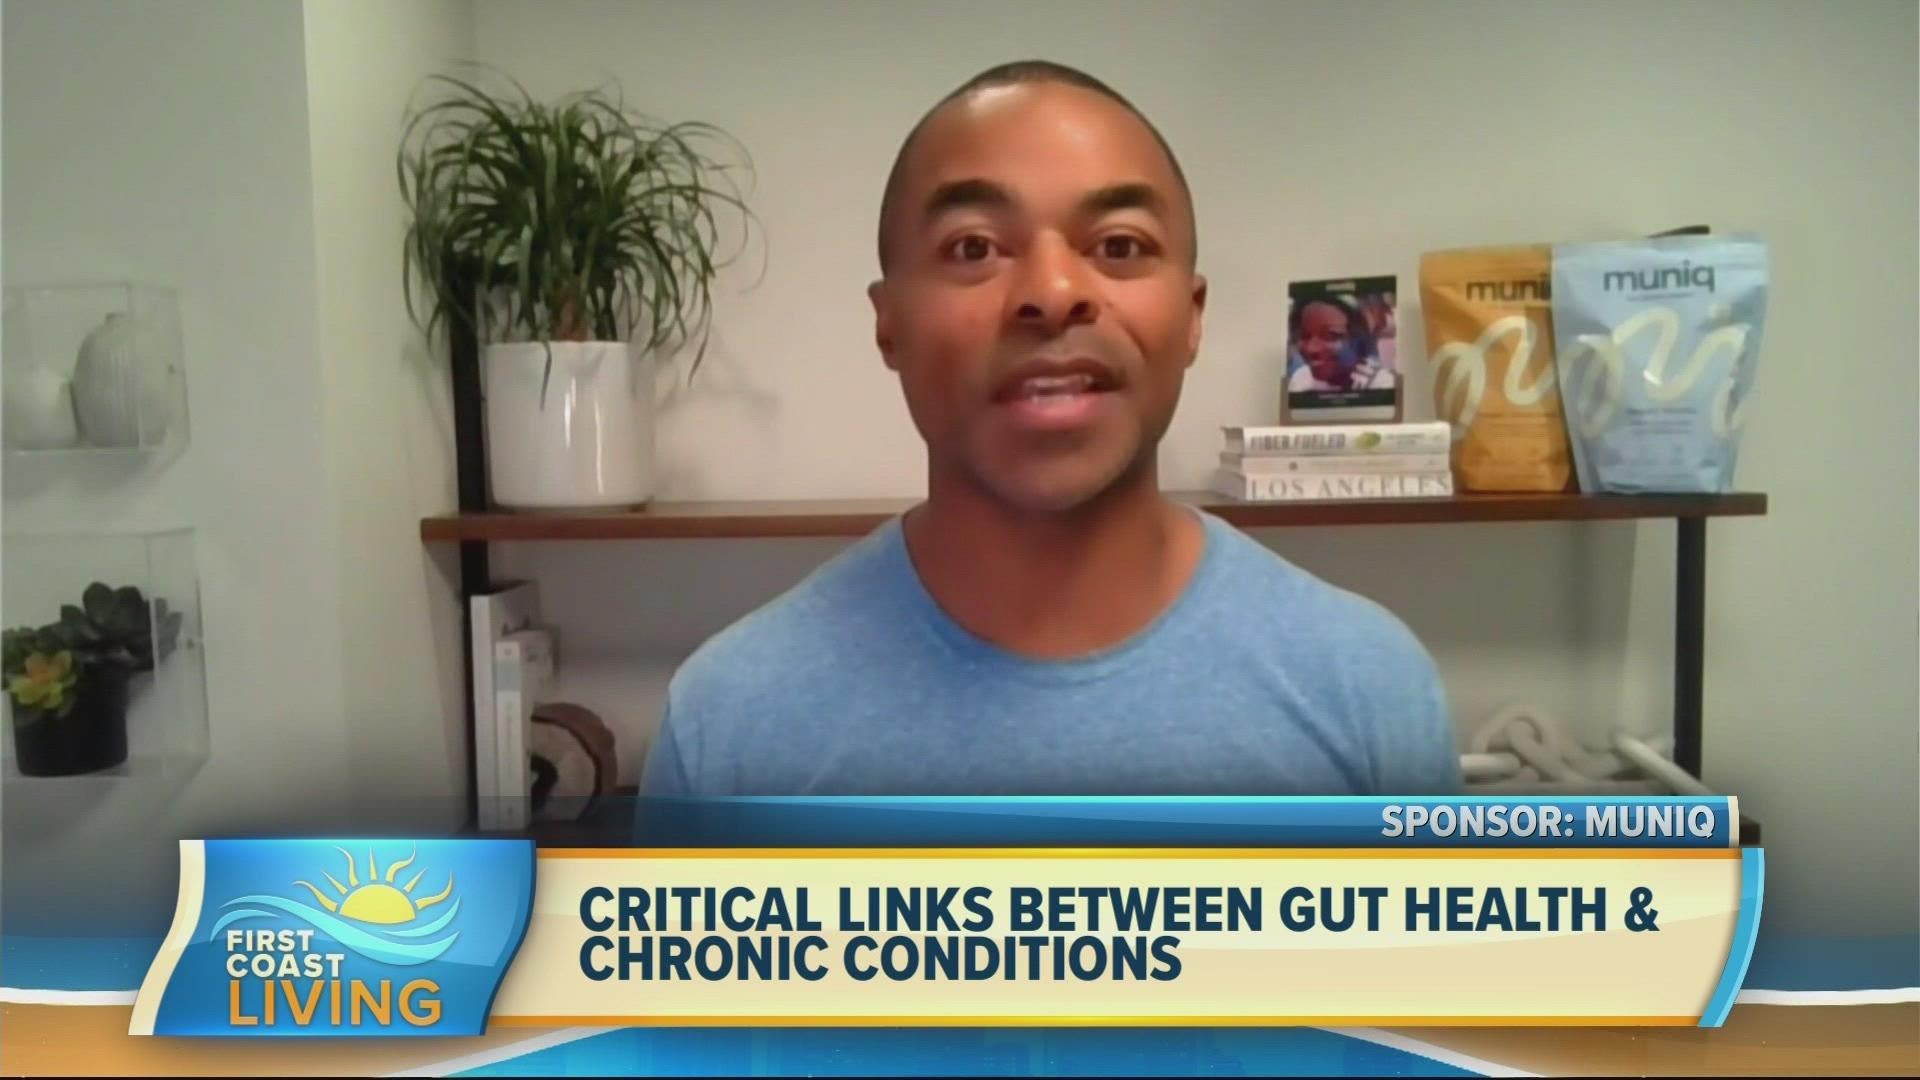 Marc Washington talks about what he found in his research about a study that linked nutrition and chronic medical conditions.